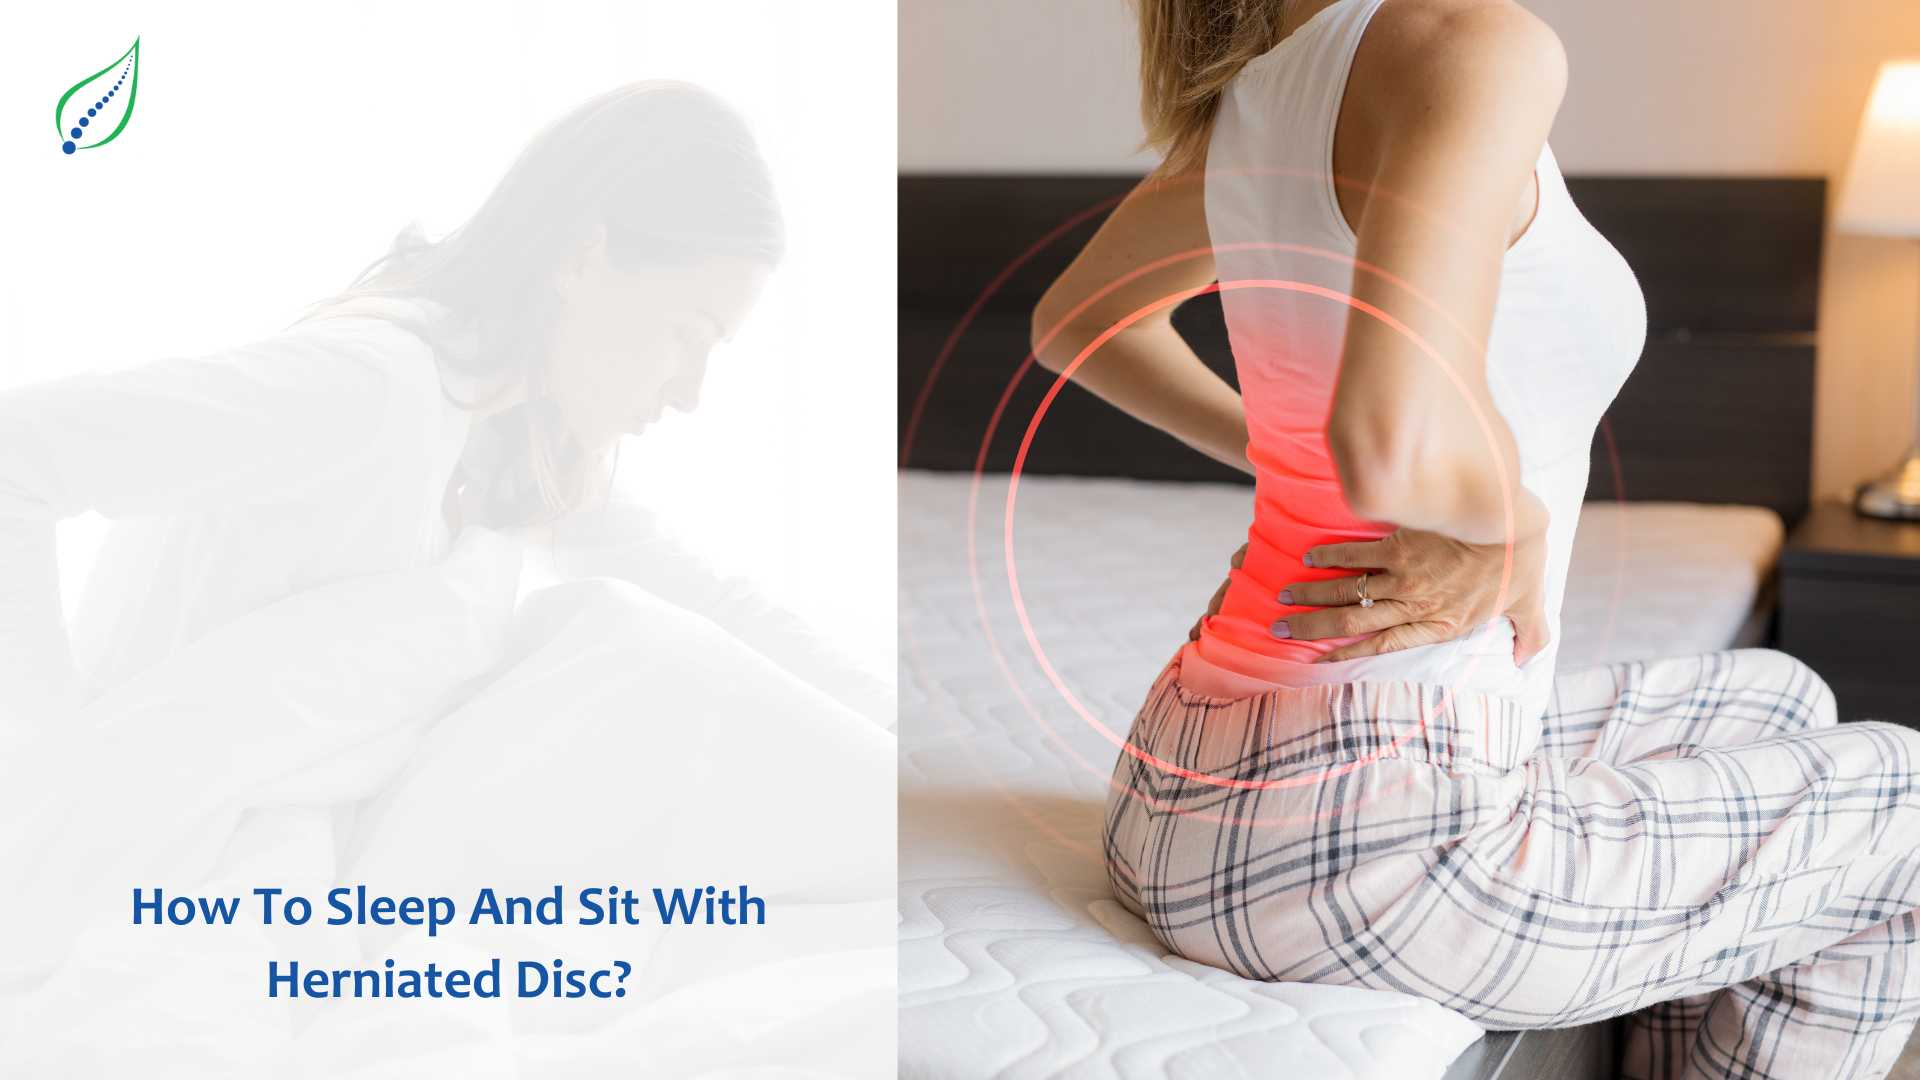 How To Sleep And Sit With Herniated Disc?